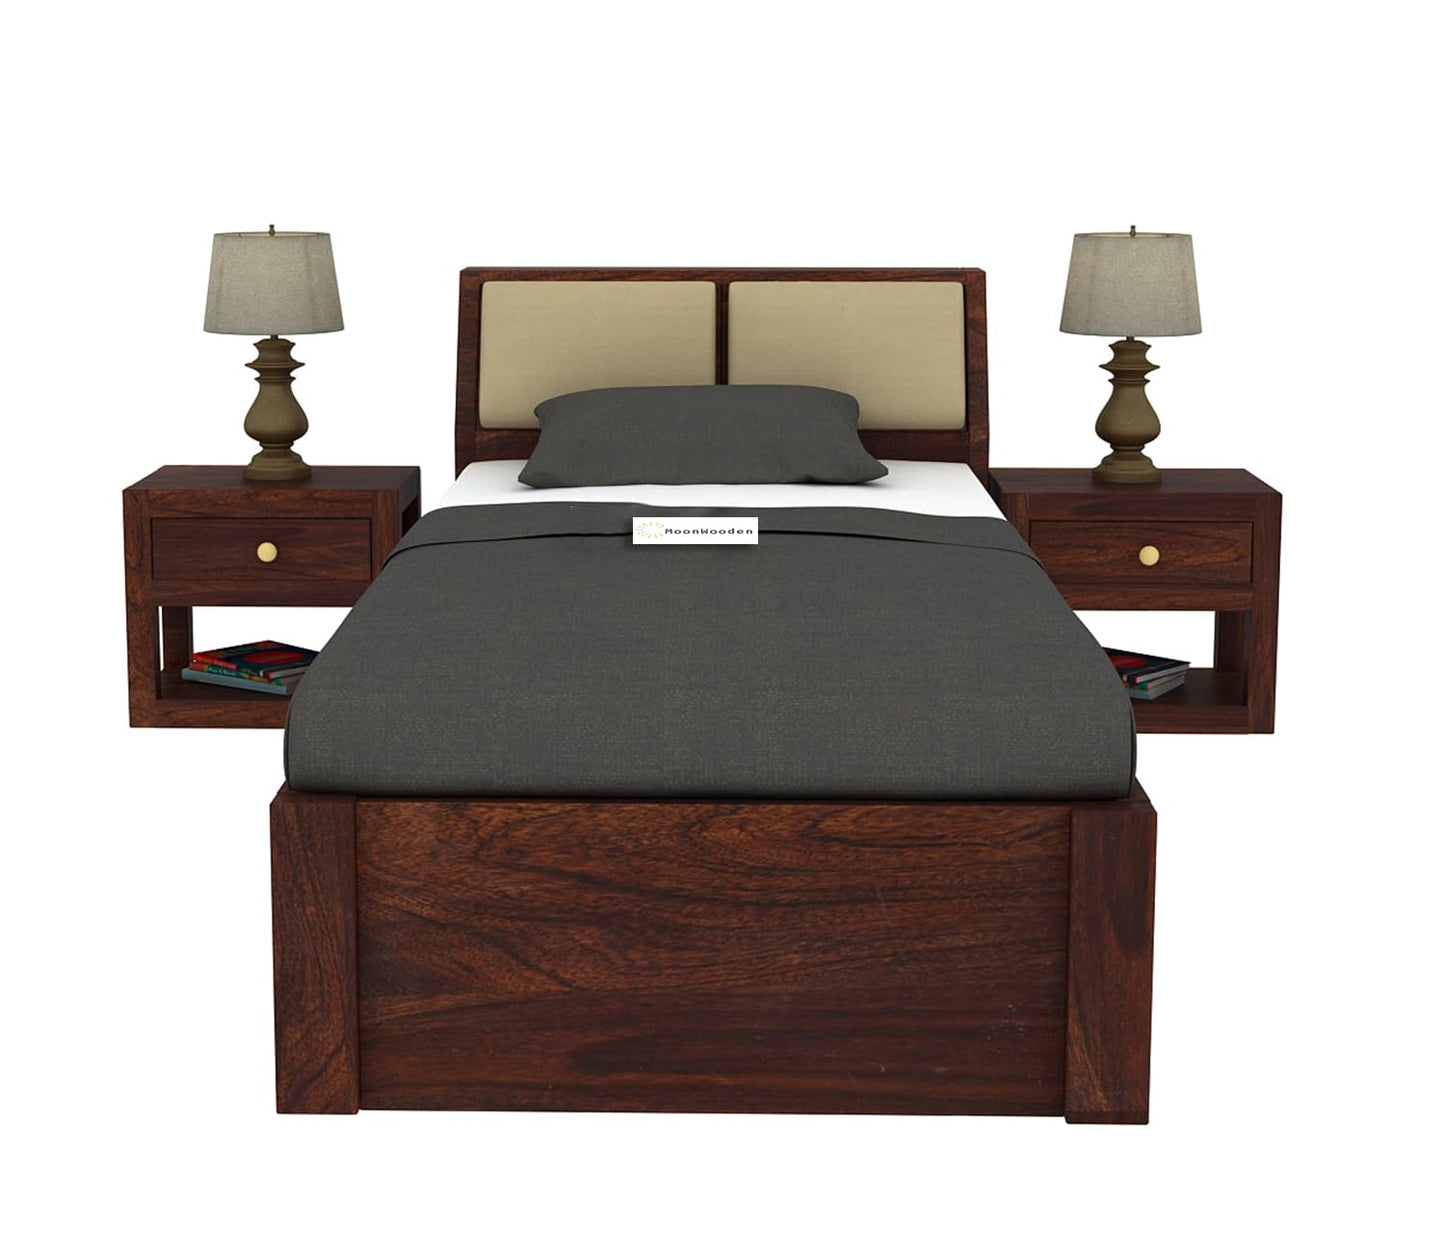 MoonWooden Sheesham Wood Single Size Bed Without Storage for Bedroom Living Room Home Wooden Palang for Hotel (Walnut Finish)